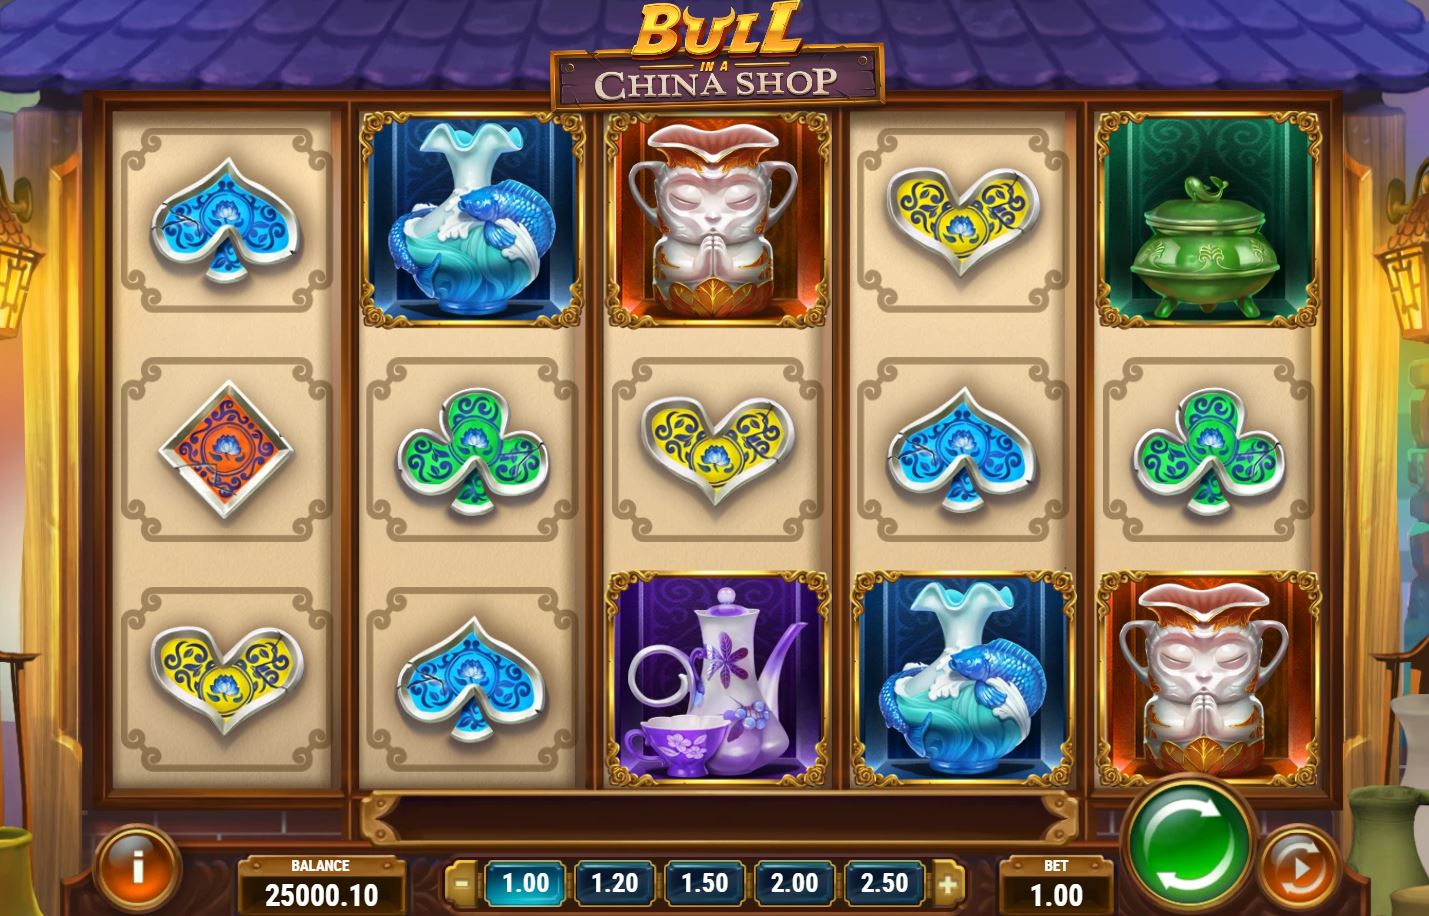 I got EVERY feature on Bull in a China Shop slot